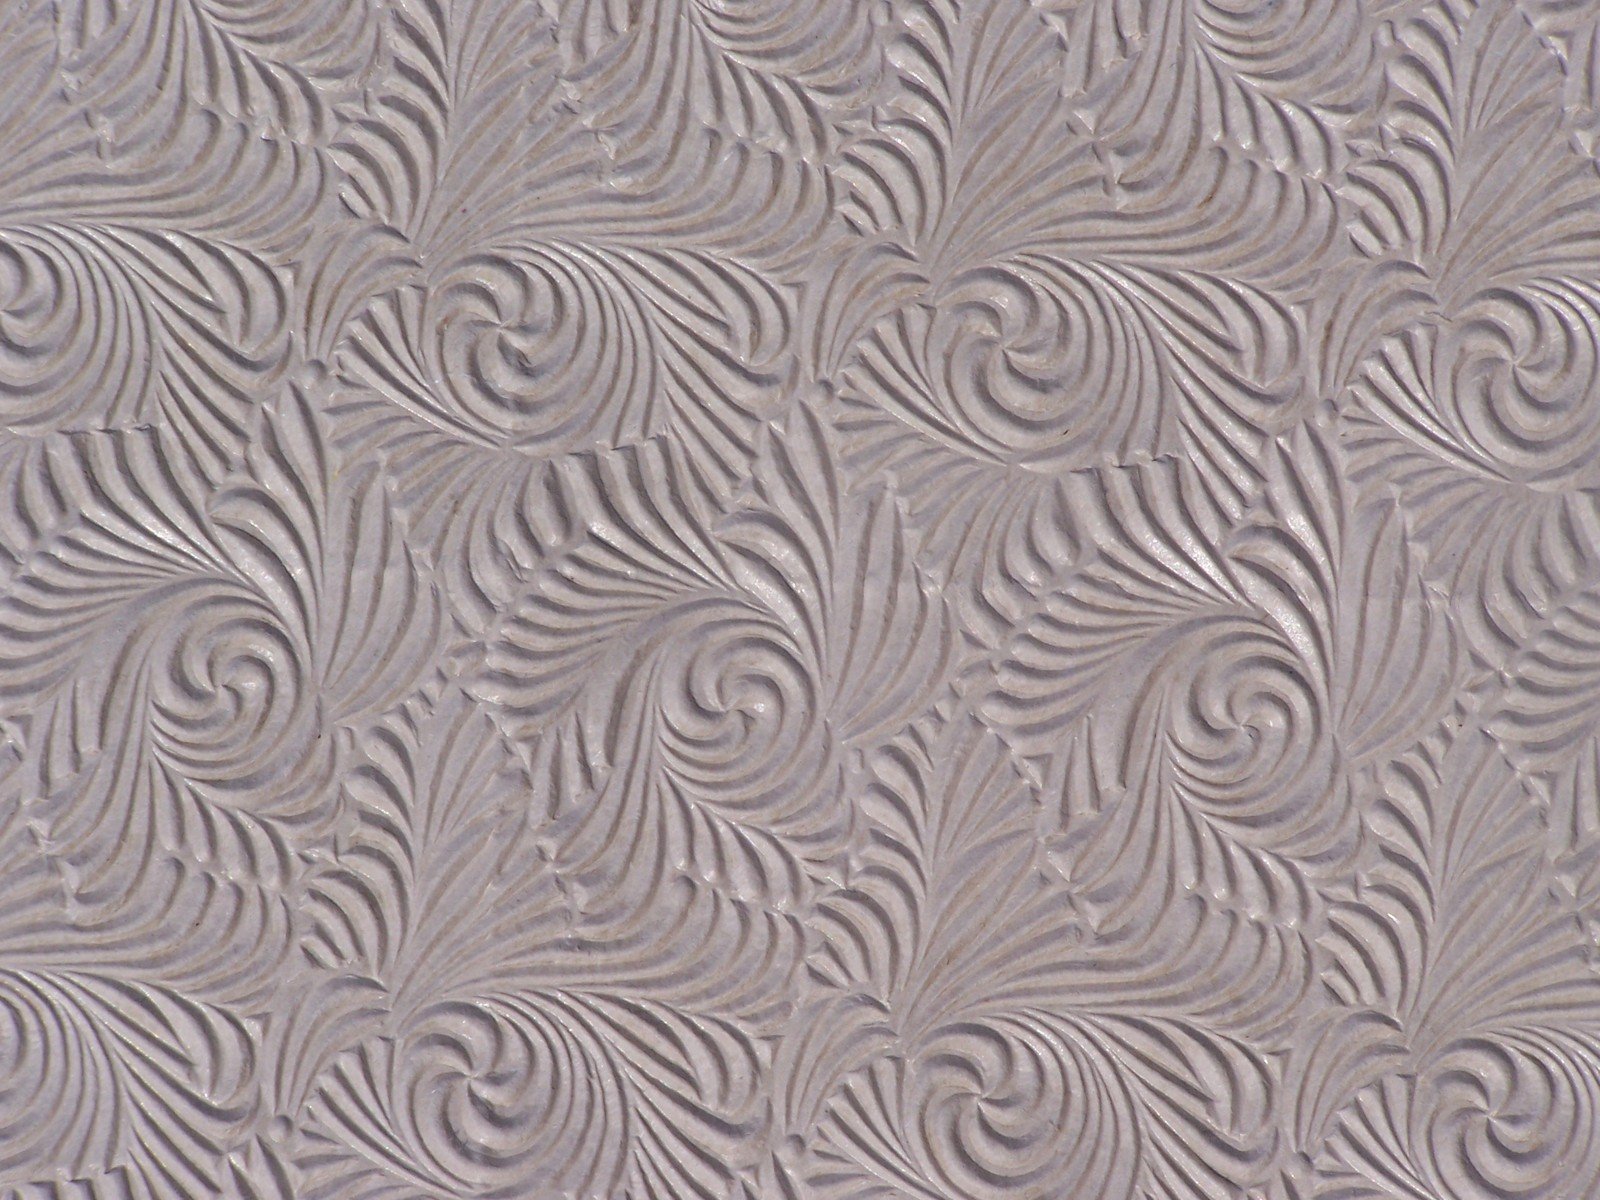 abstract pattern made up of wavy lines in grey and white